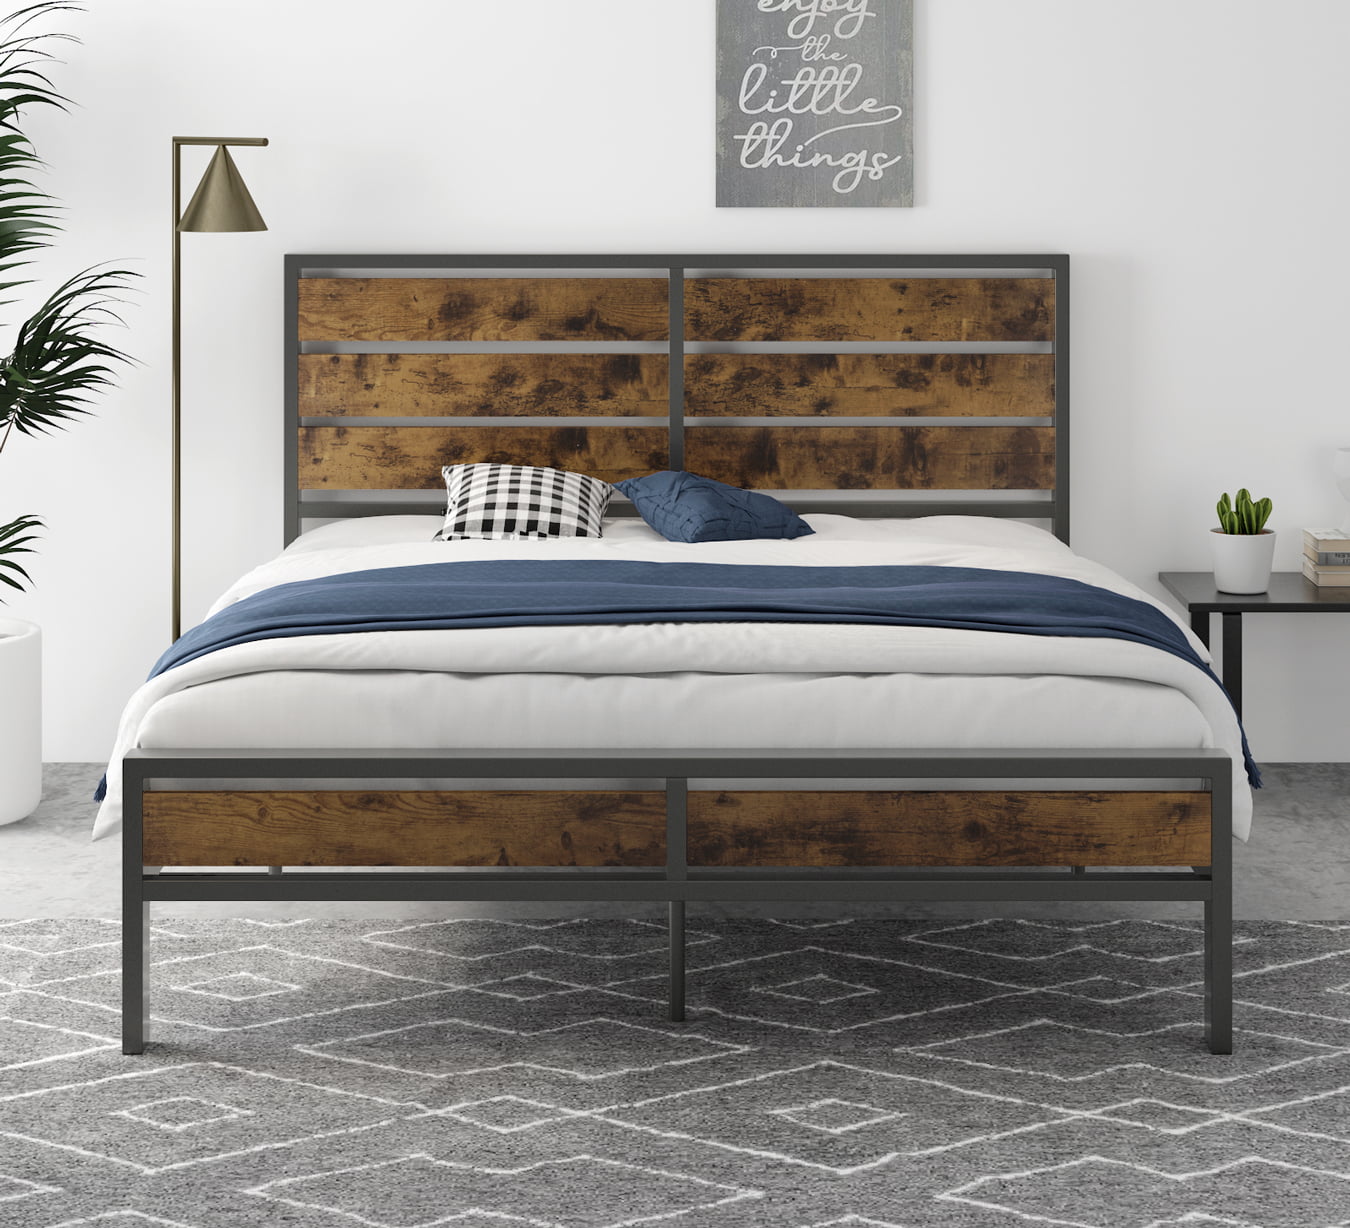 Amolife Queen Size Bed Frame With Wood, Queen Bed Wood Headboard And Footboard